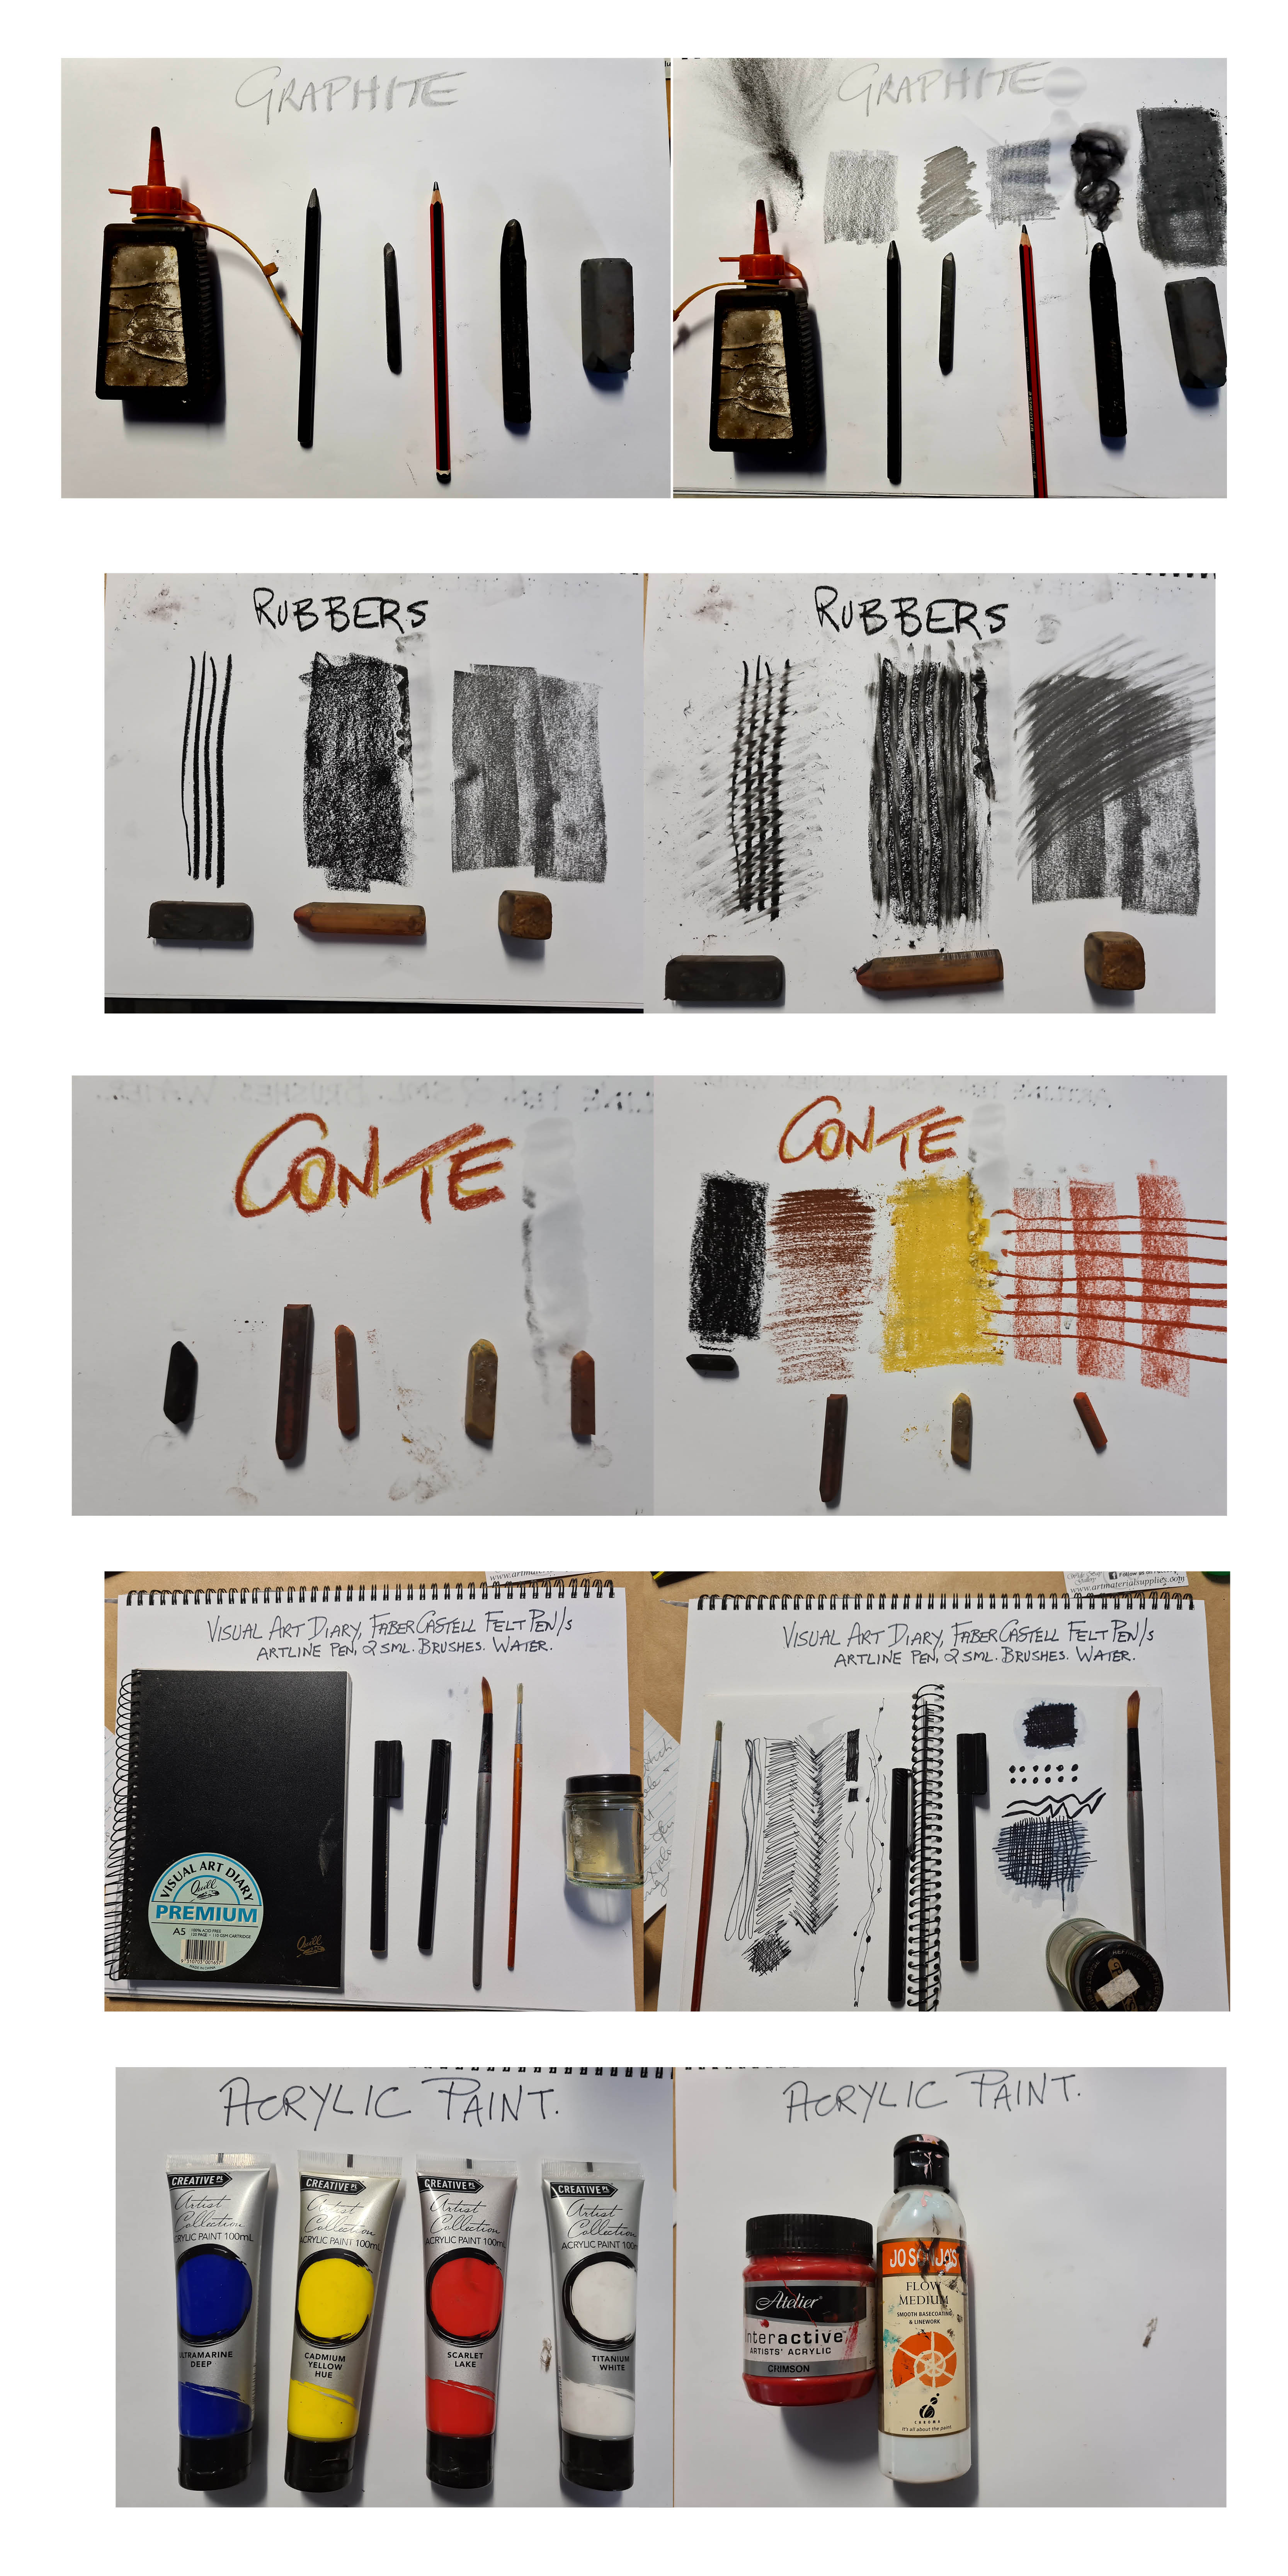 Art materials recommended for the 'A Change in Perception' series of lessons